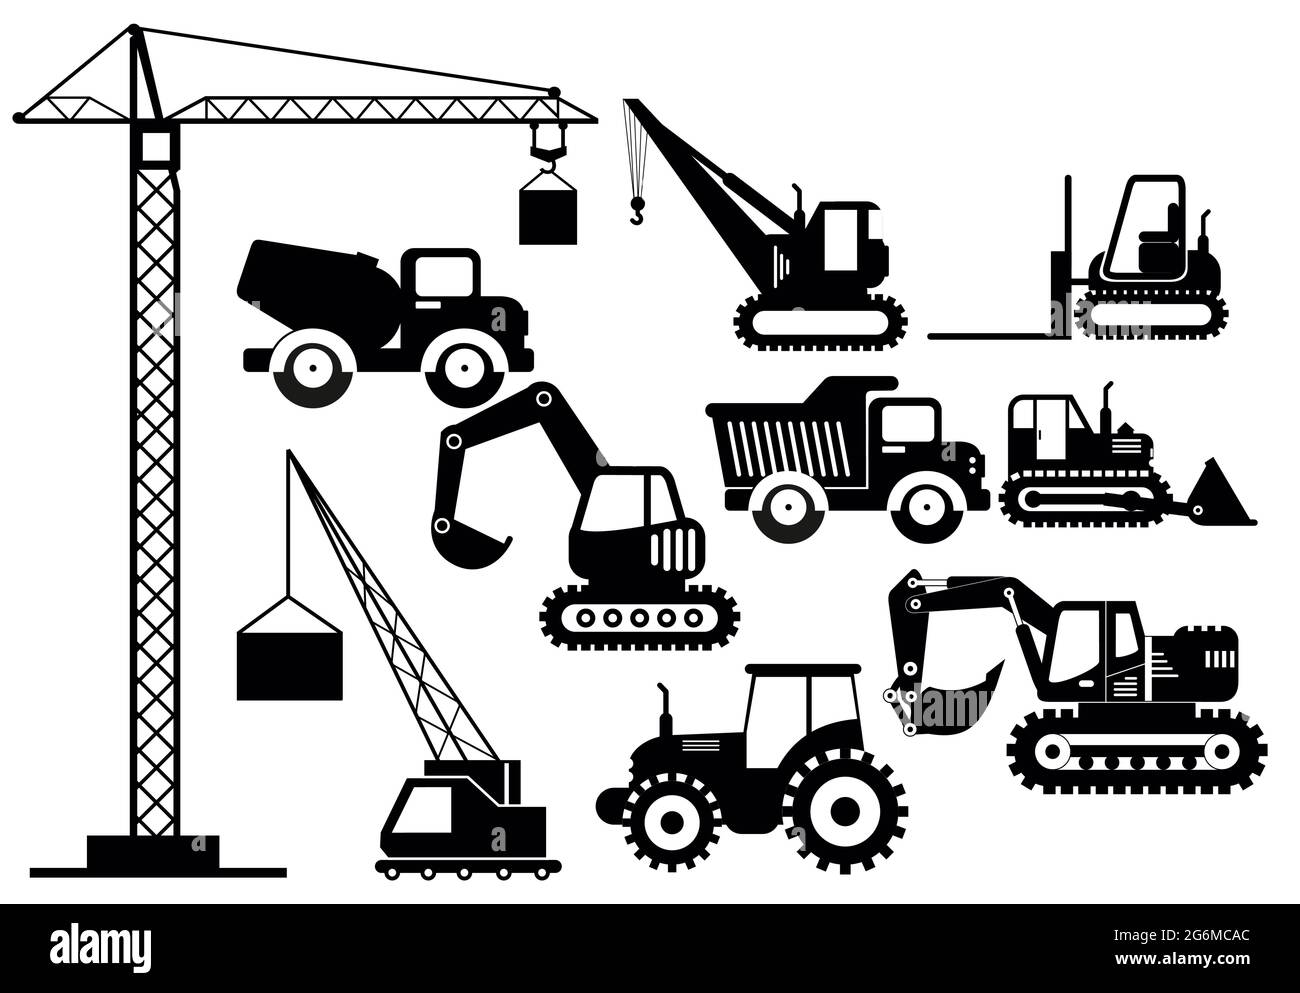 Vector illustration set of excavators and heavy construction machines icons. Silhouette illustration equipment and machinery on white background. Stock Vector